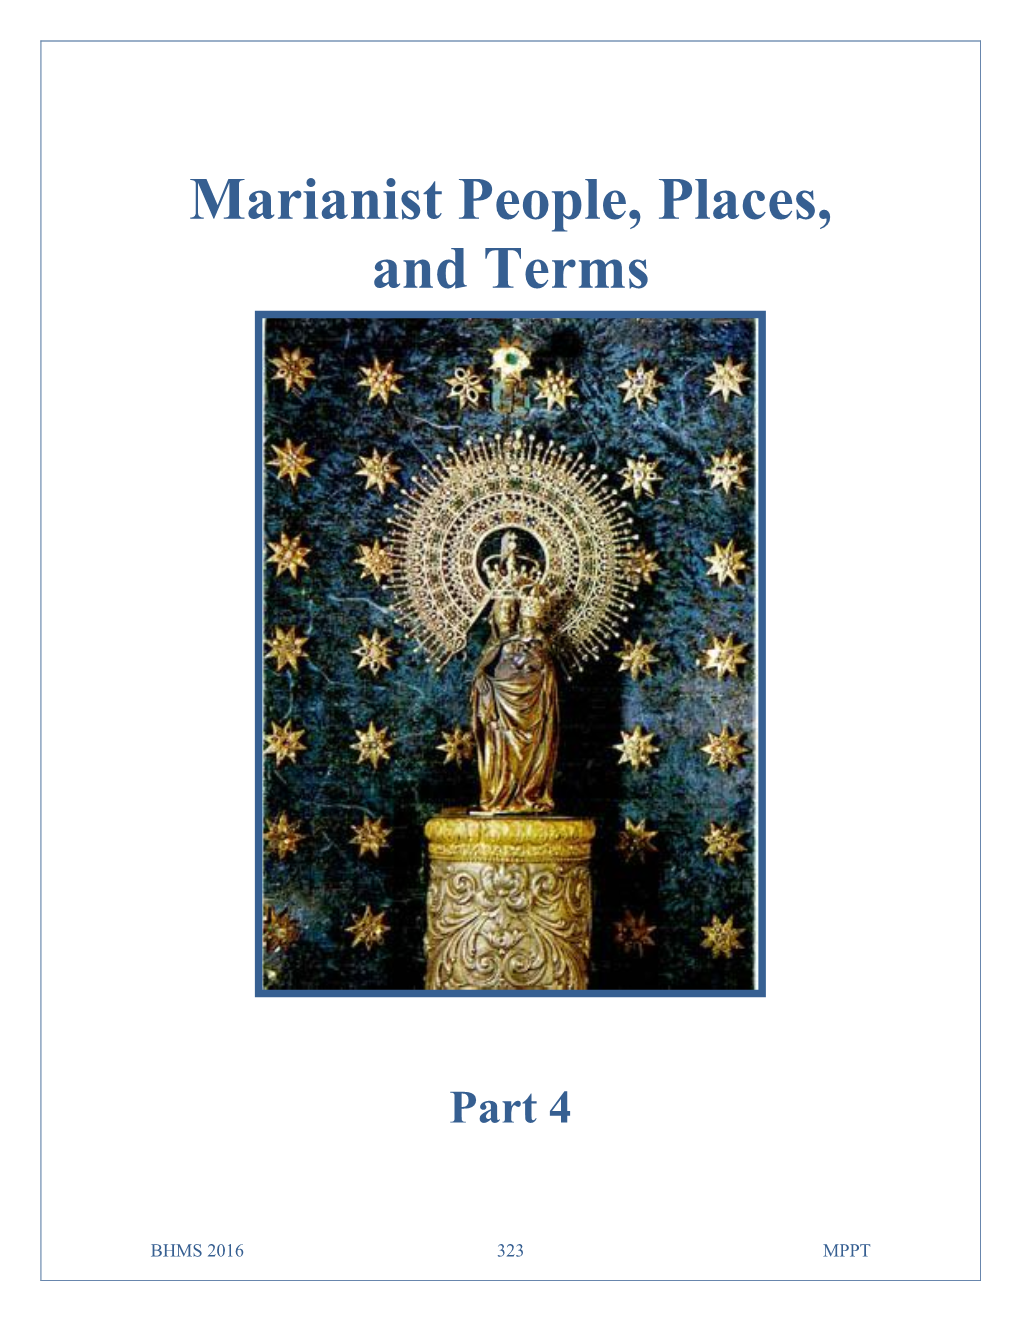 Marianist People, Places, and Terms